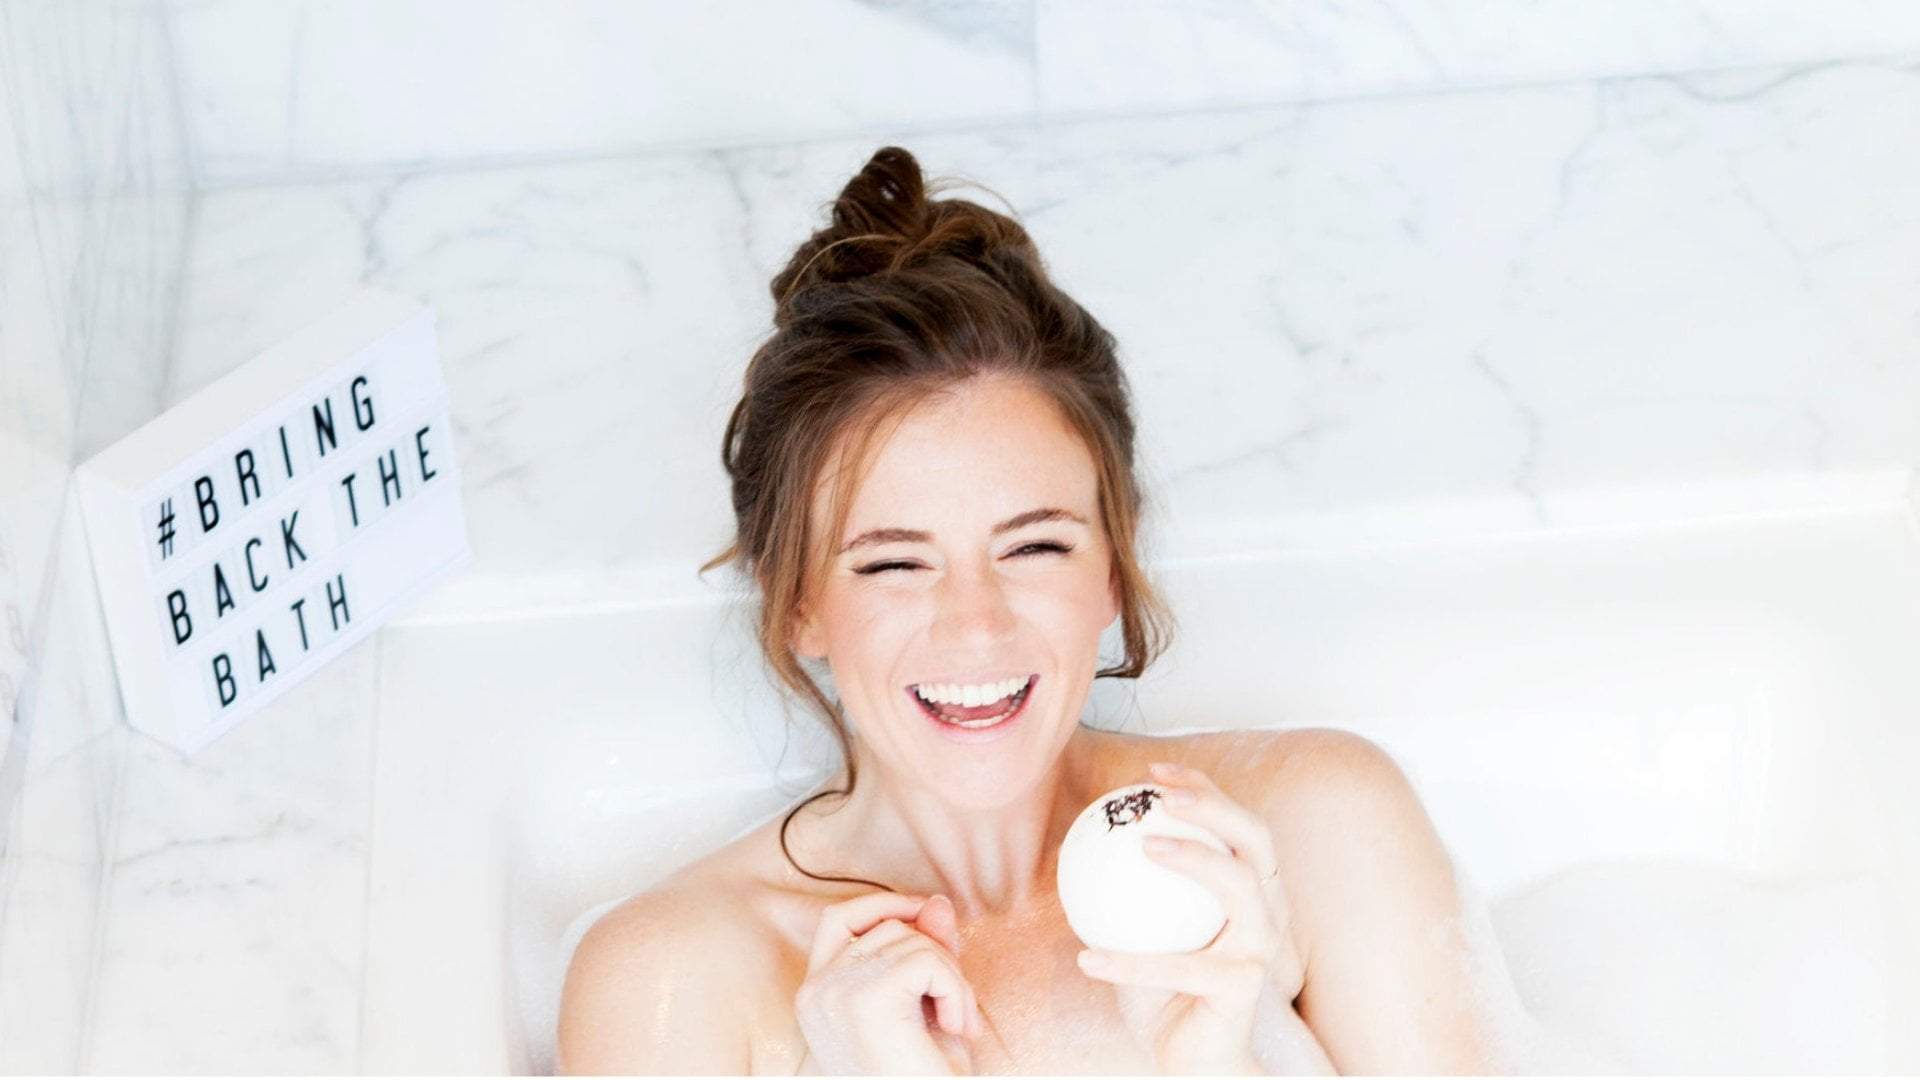 6 Things To Know About Bathorium Bath Bombs